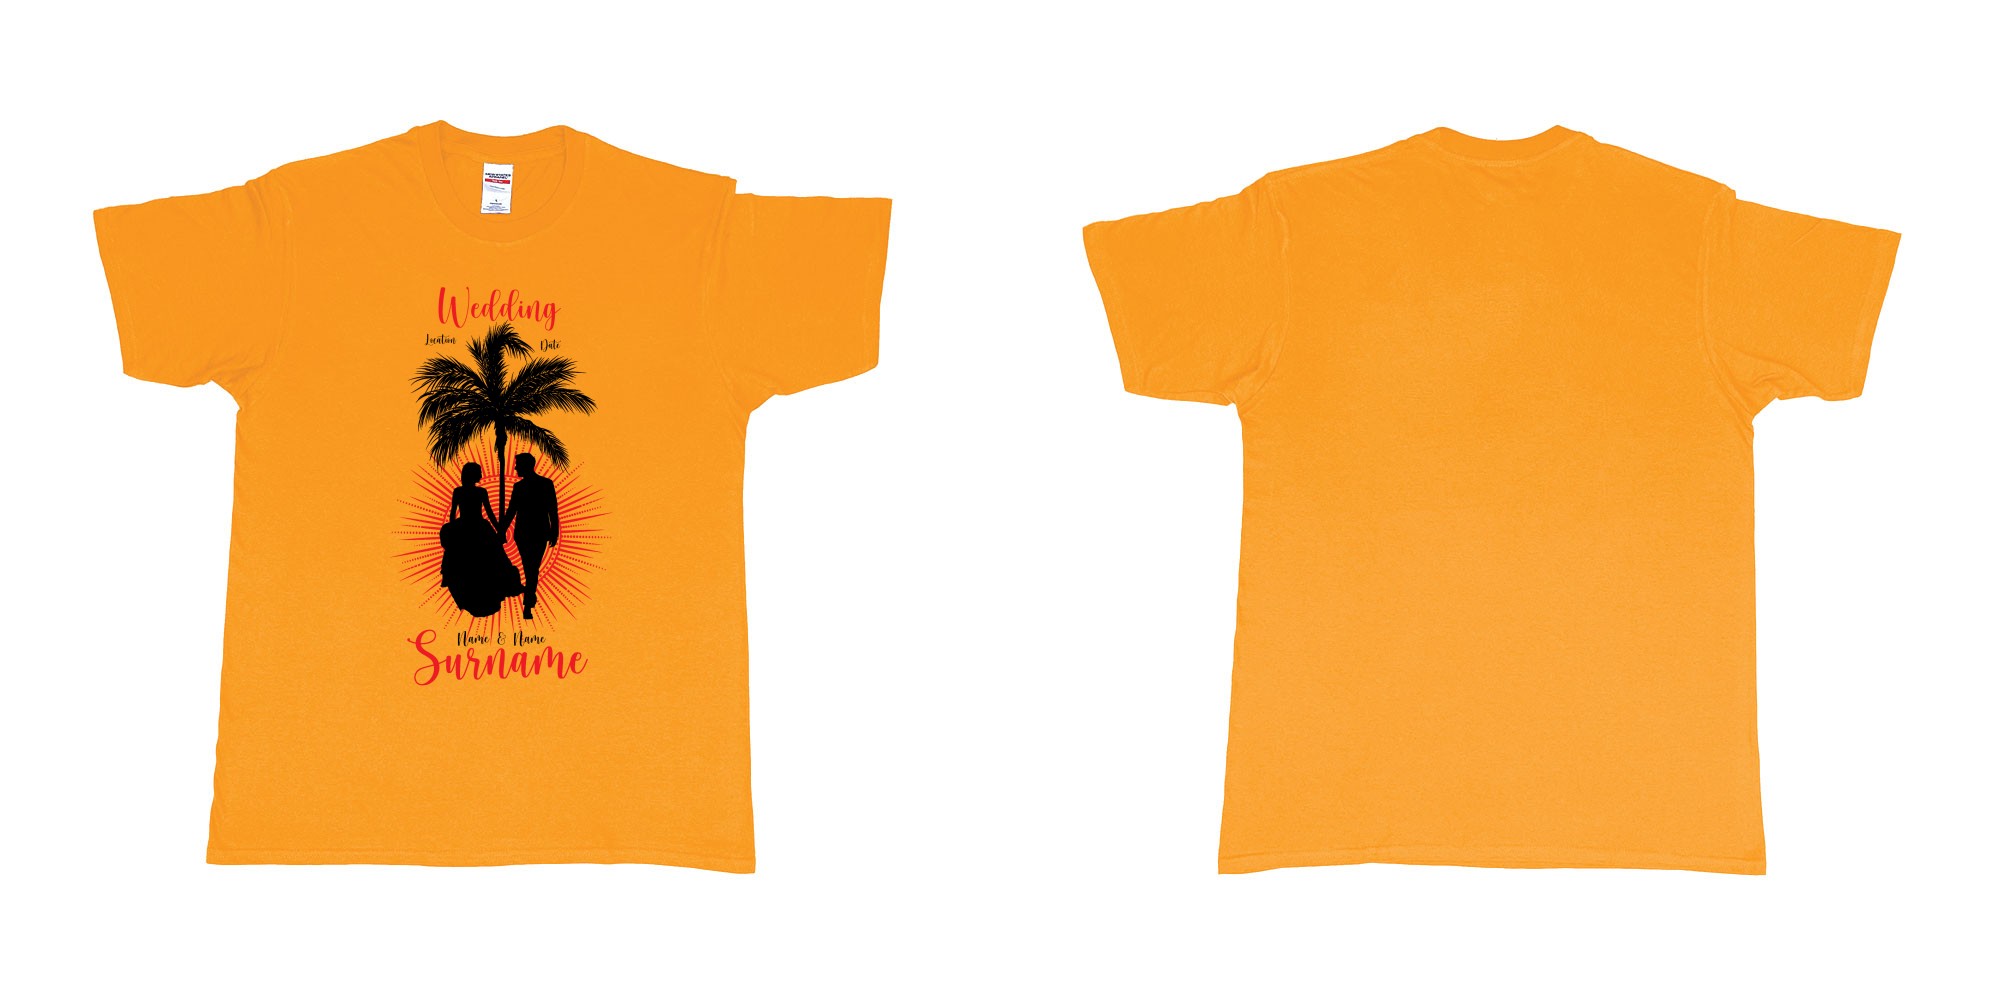 Custom tshirt design wedding palm sun bali in fabric color gold choice your own text made in Bali by The Pirate Way